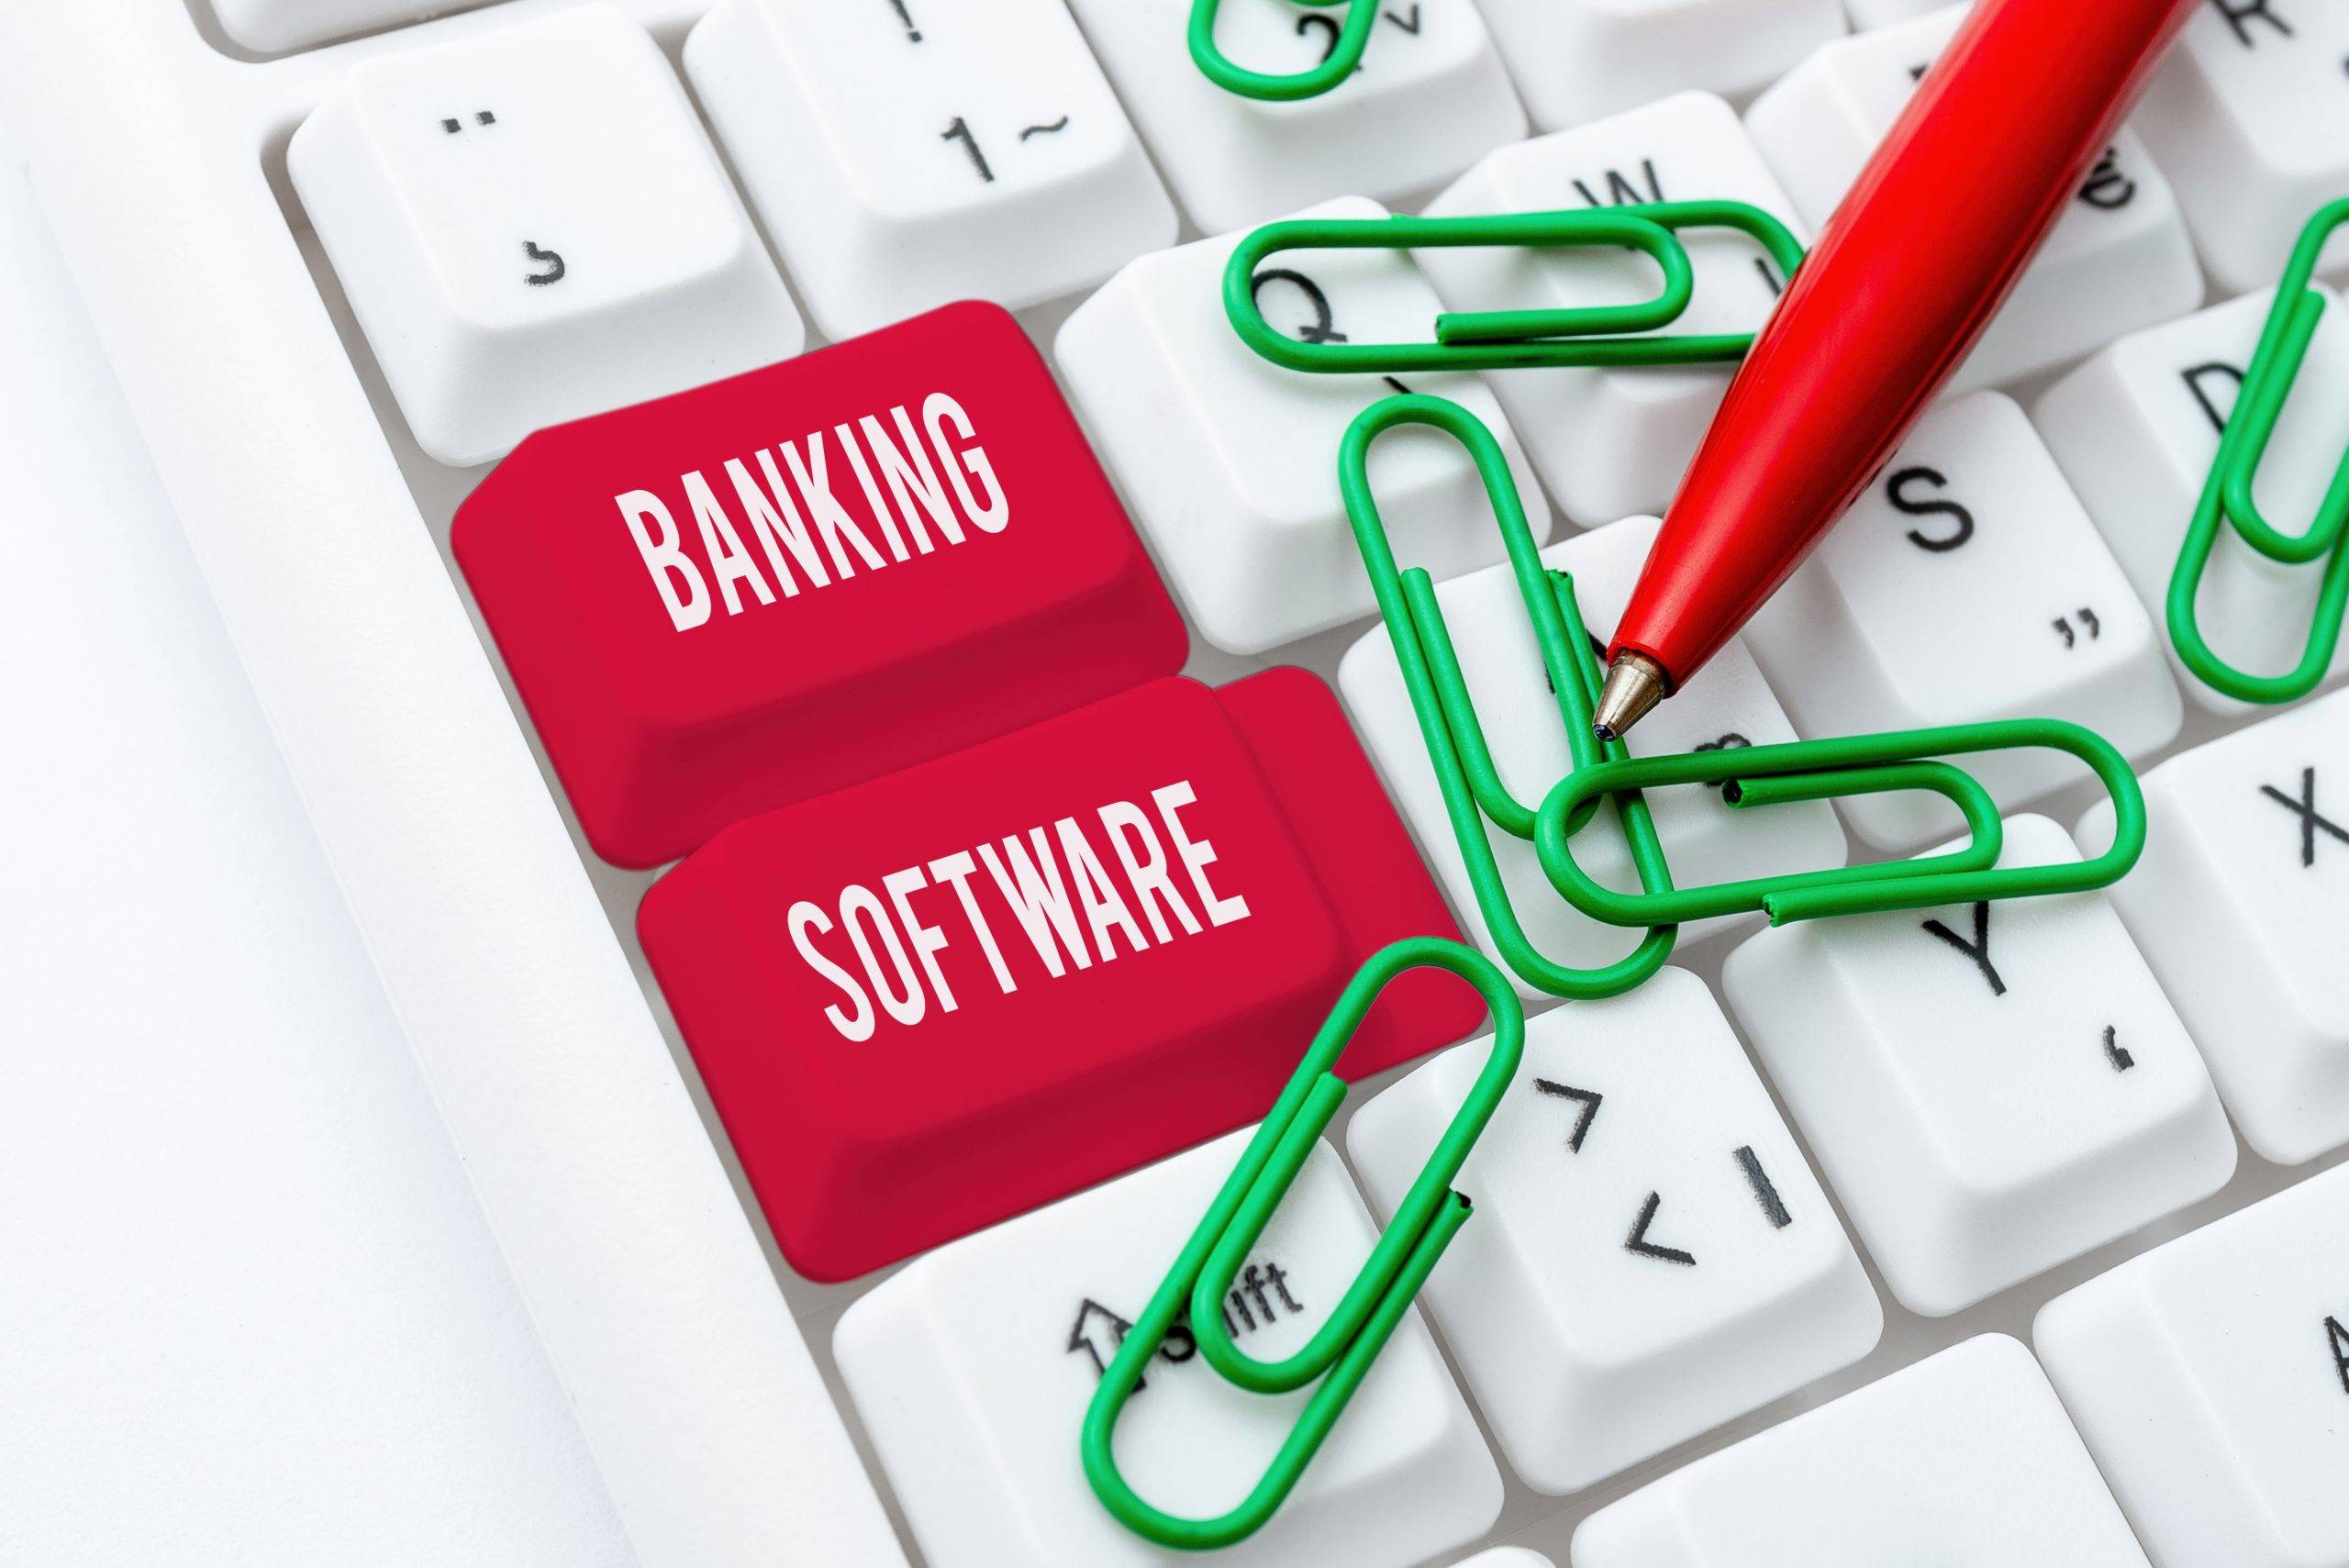 core banking software